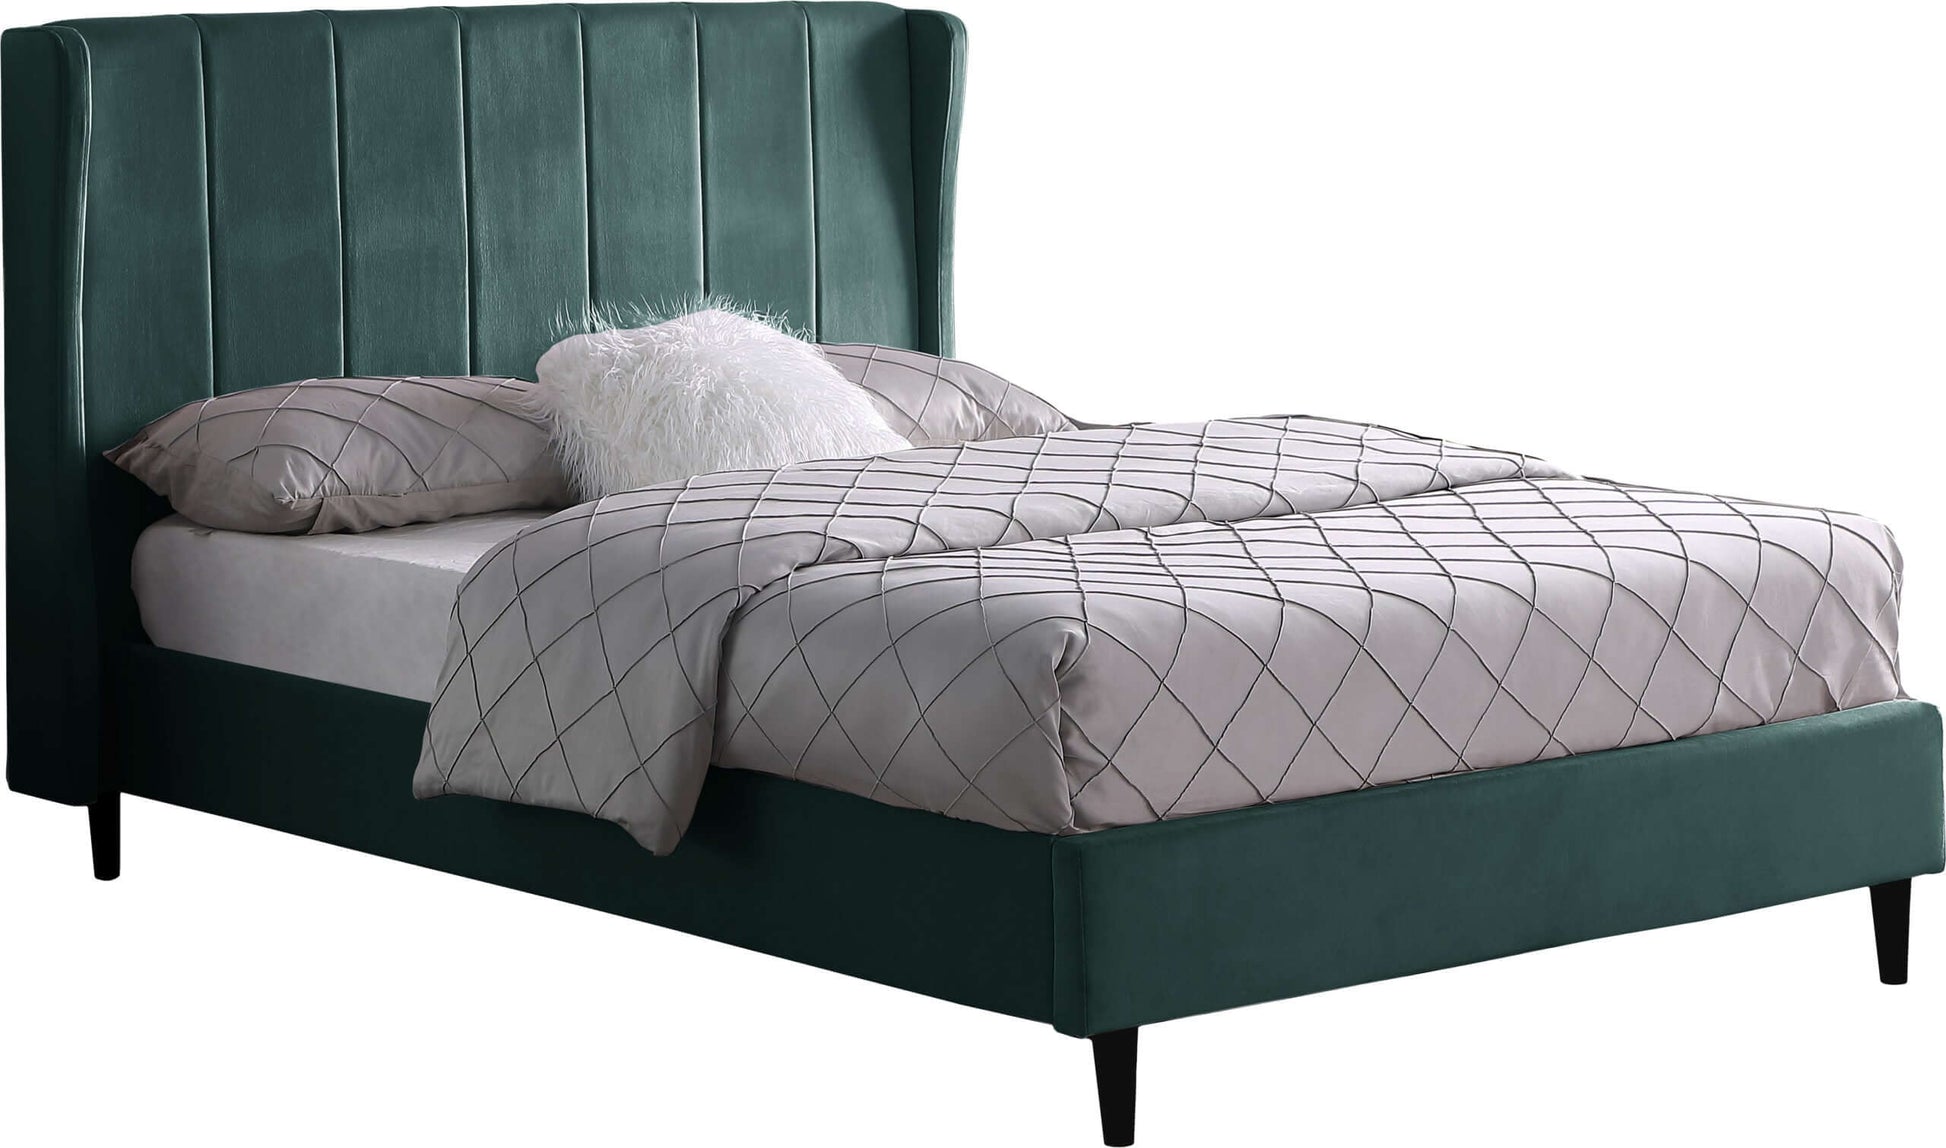 Amelia 5' King  Bed Green Velvet Fabric- The Right Buy Store